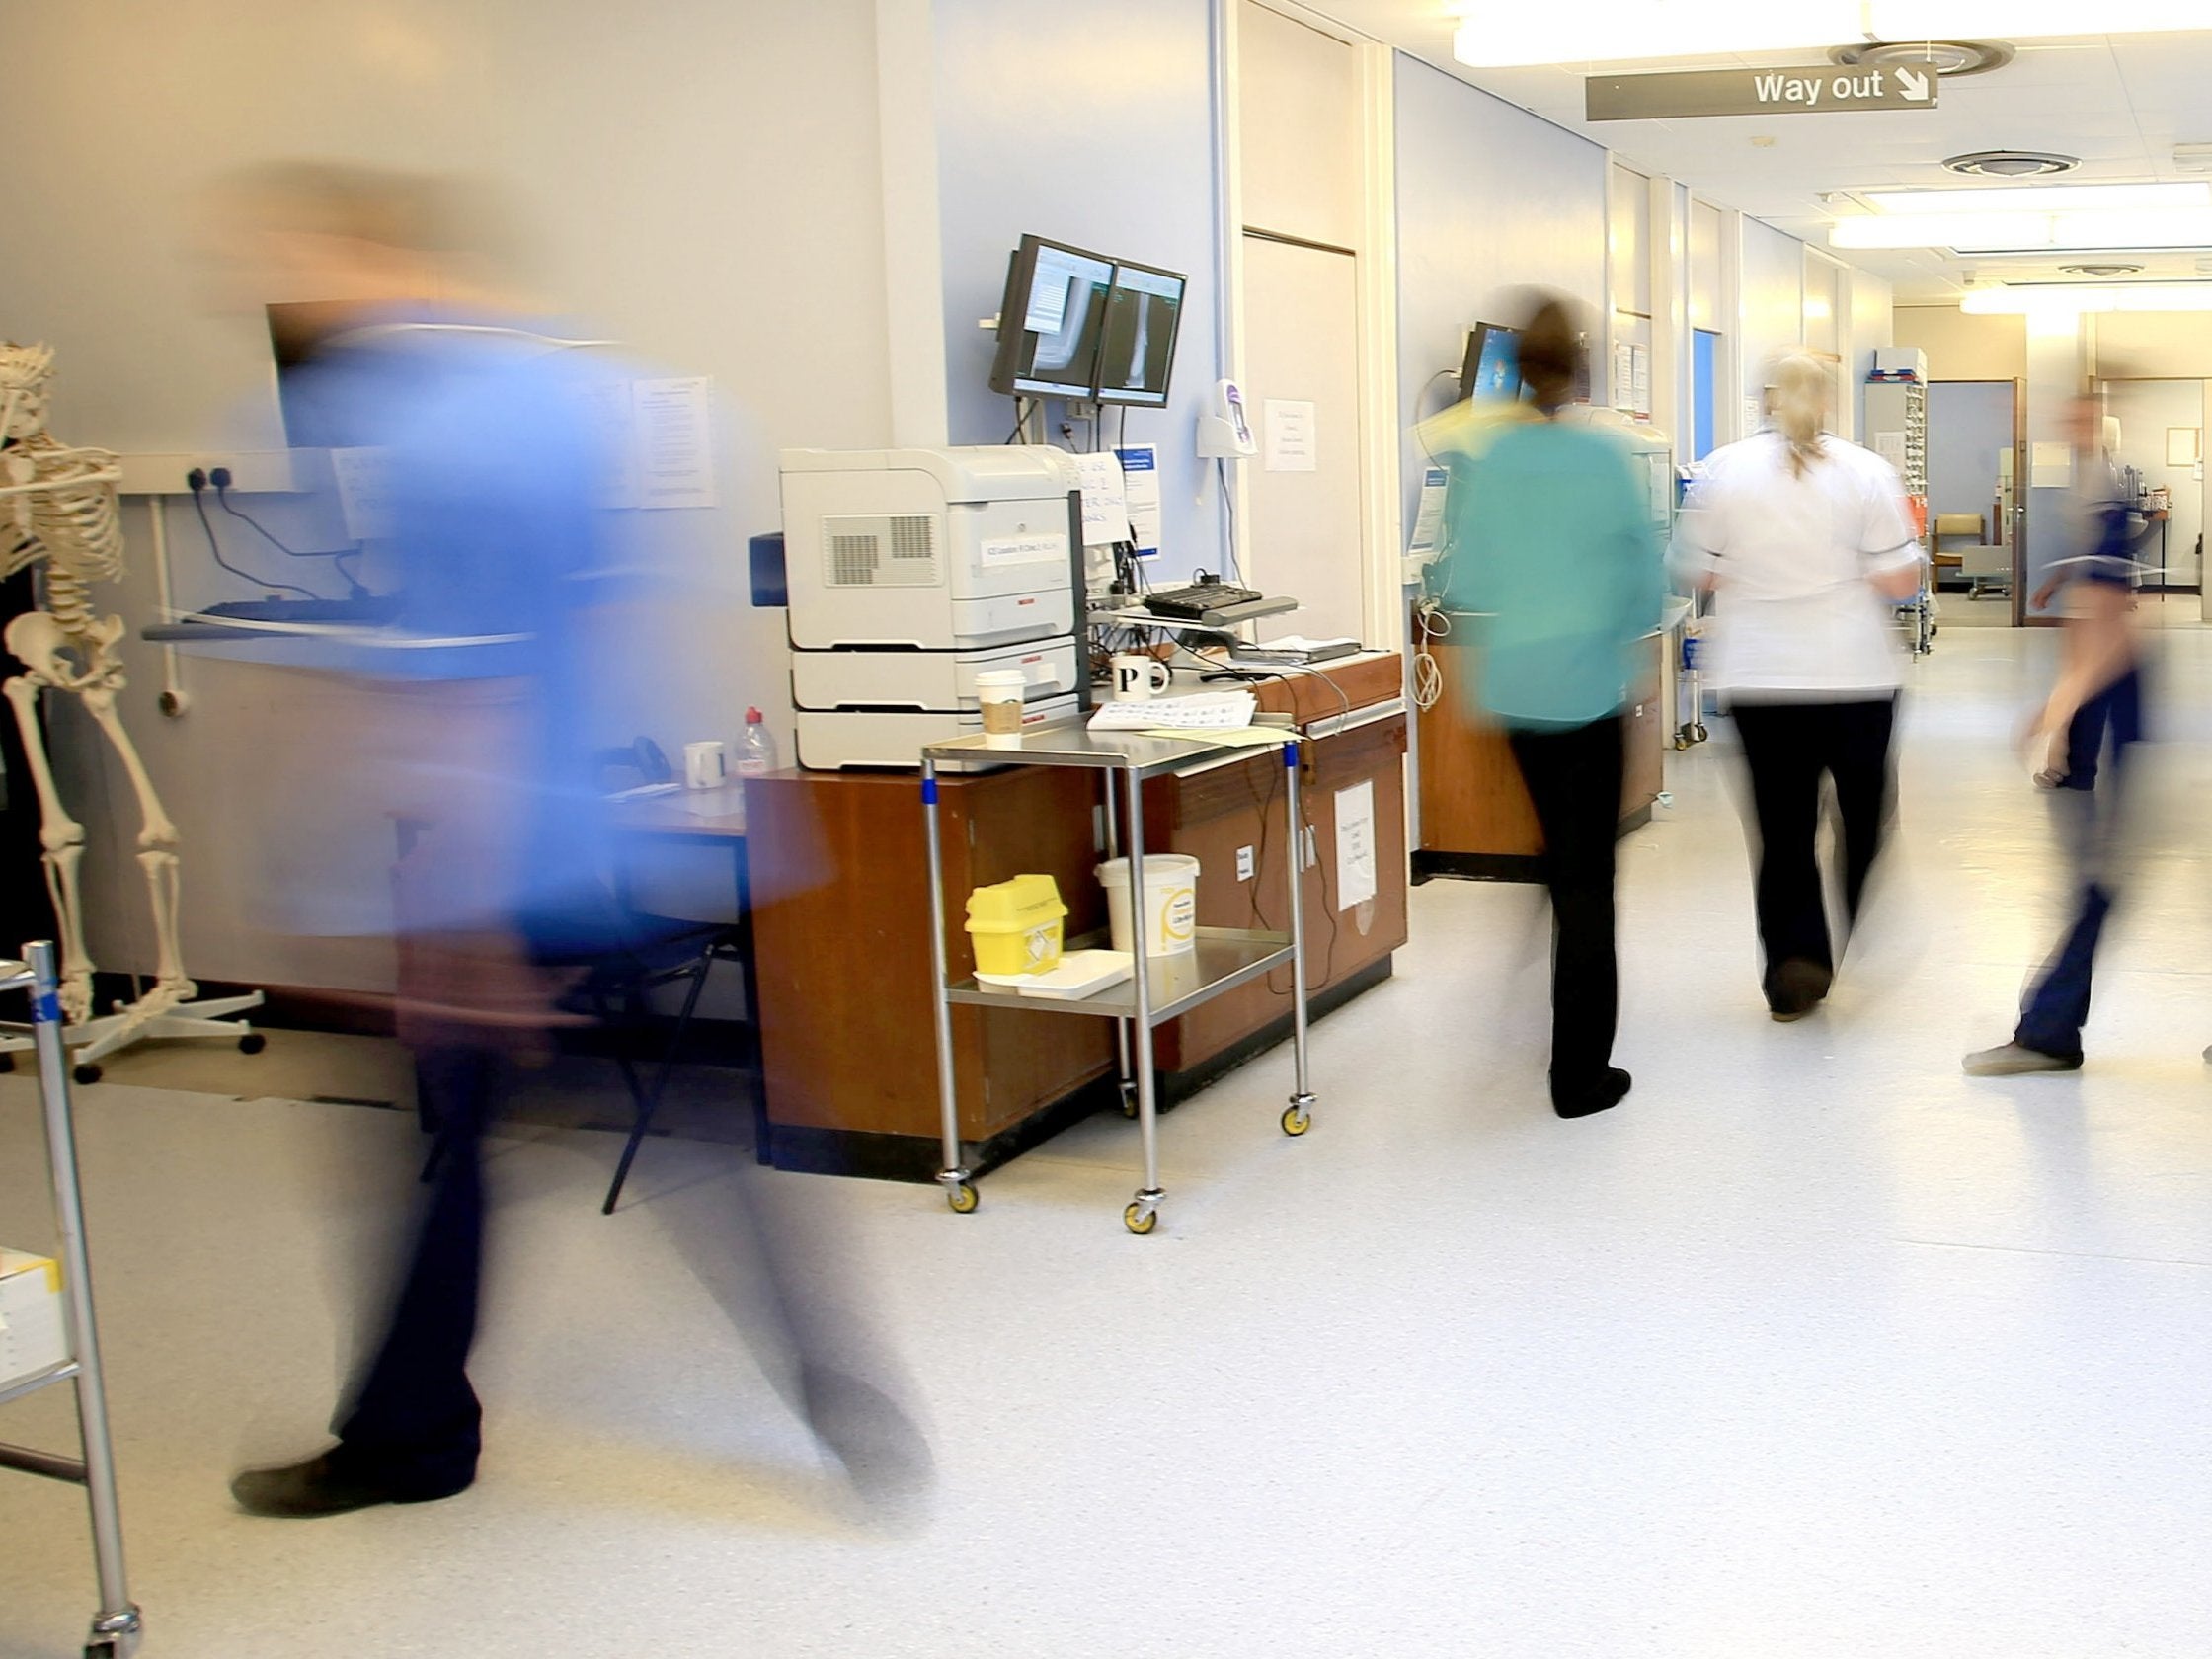 Fewer than 7 per cent said they expected to remain working in the NHS after the age of 65